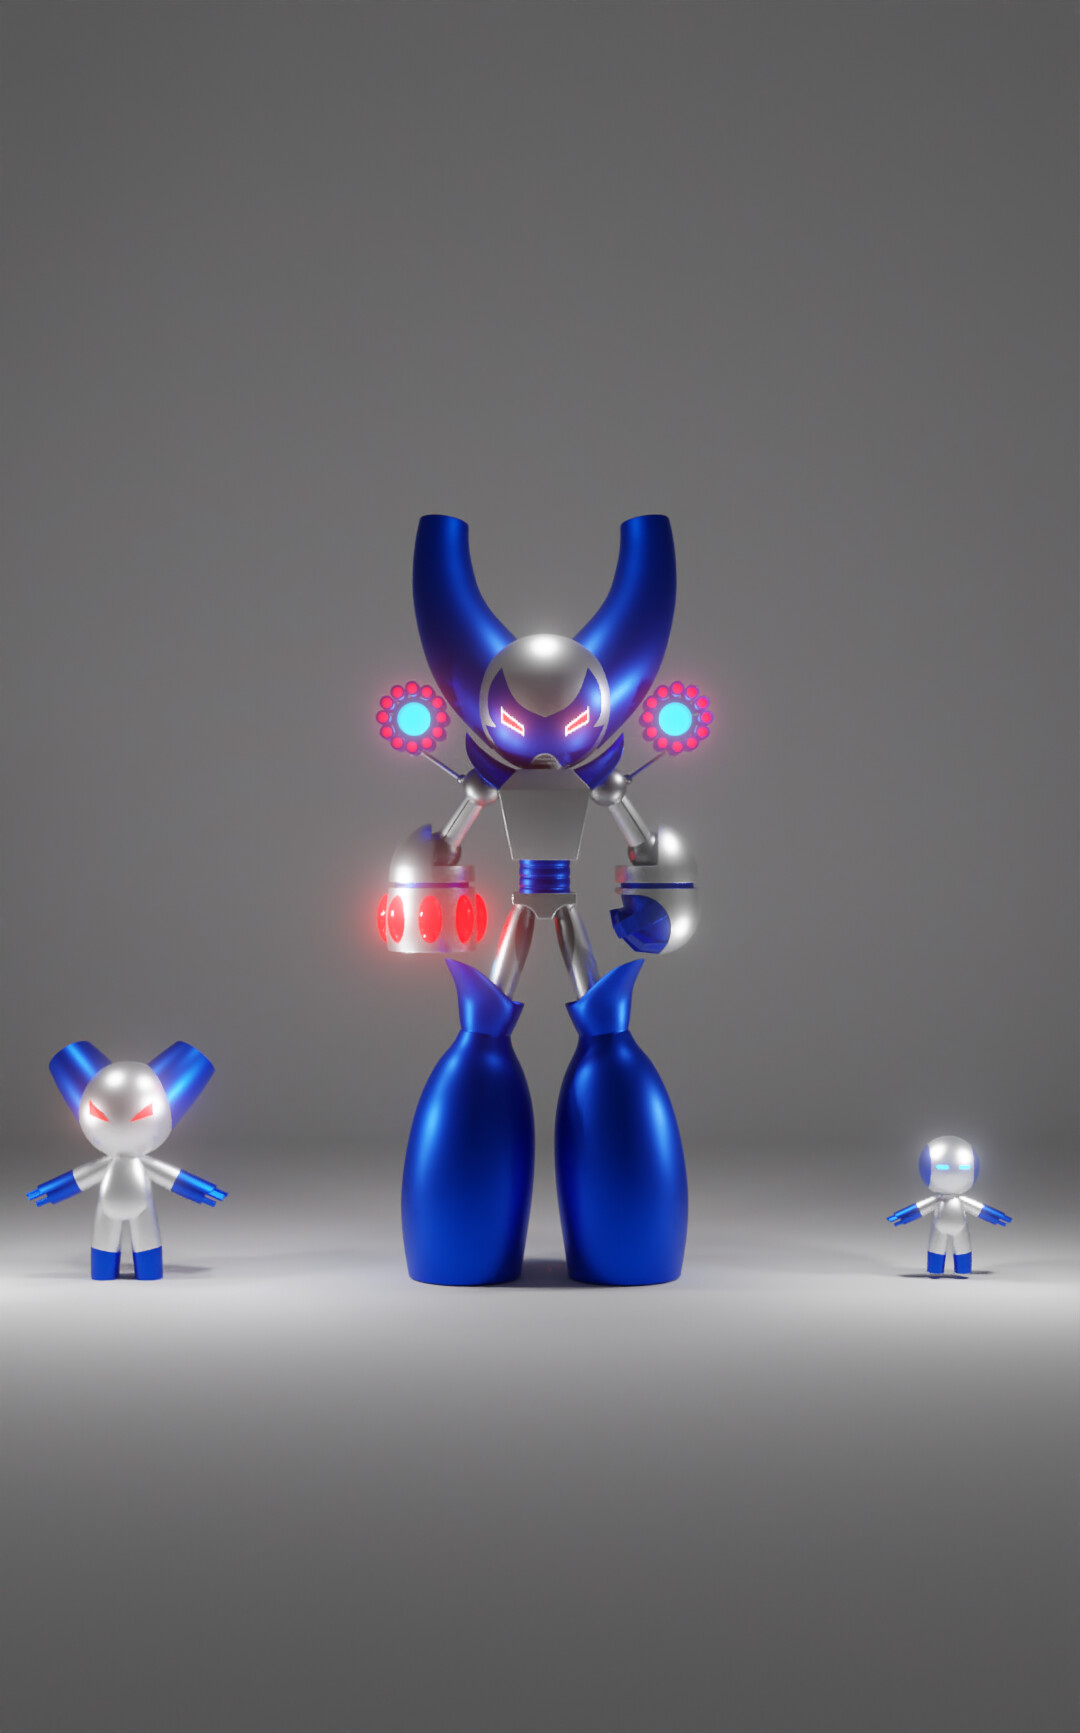 RobotBoy - 3D Model by supercigale